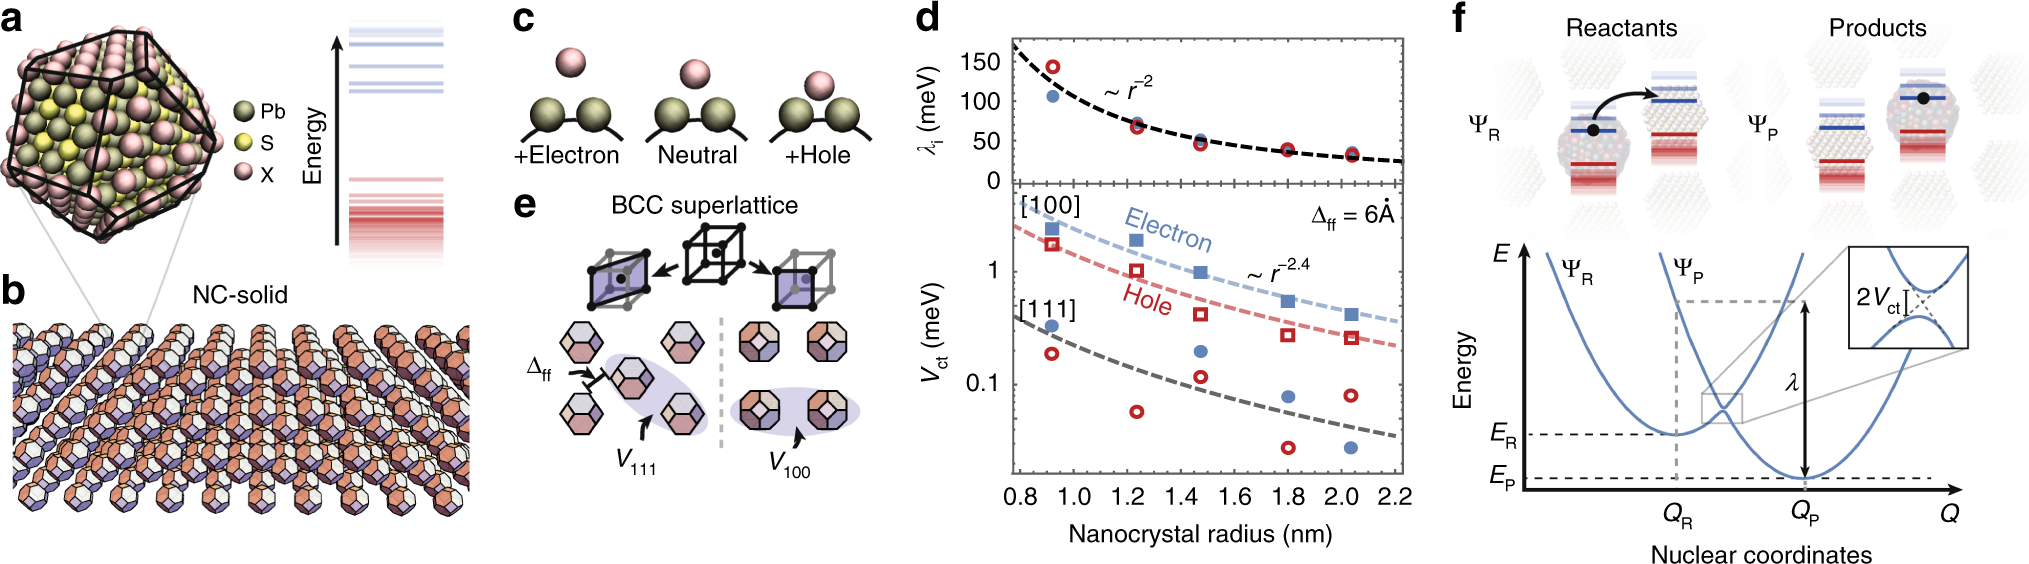 Charge transport in semiconductors assembled from nanocrystal quantum dots  | Nature Communications